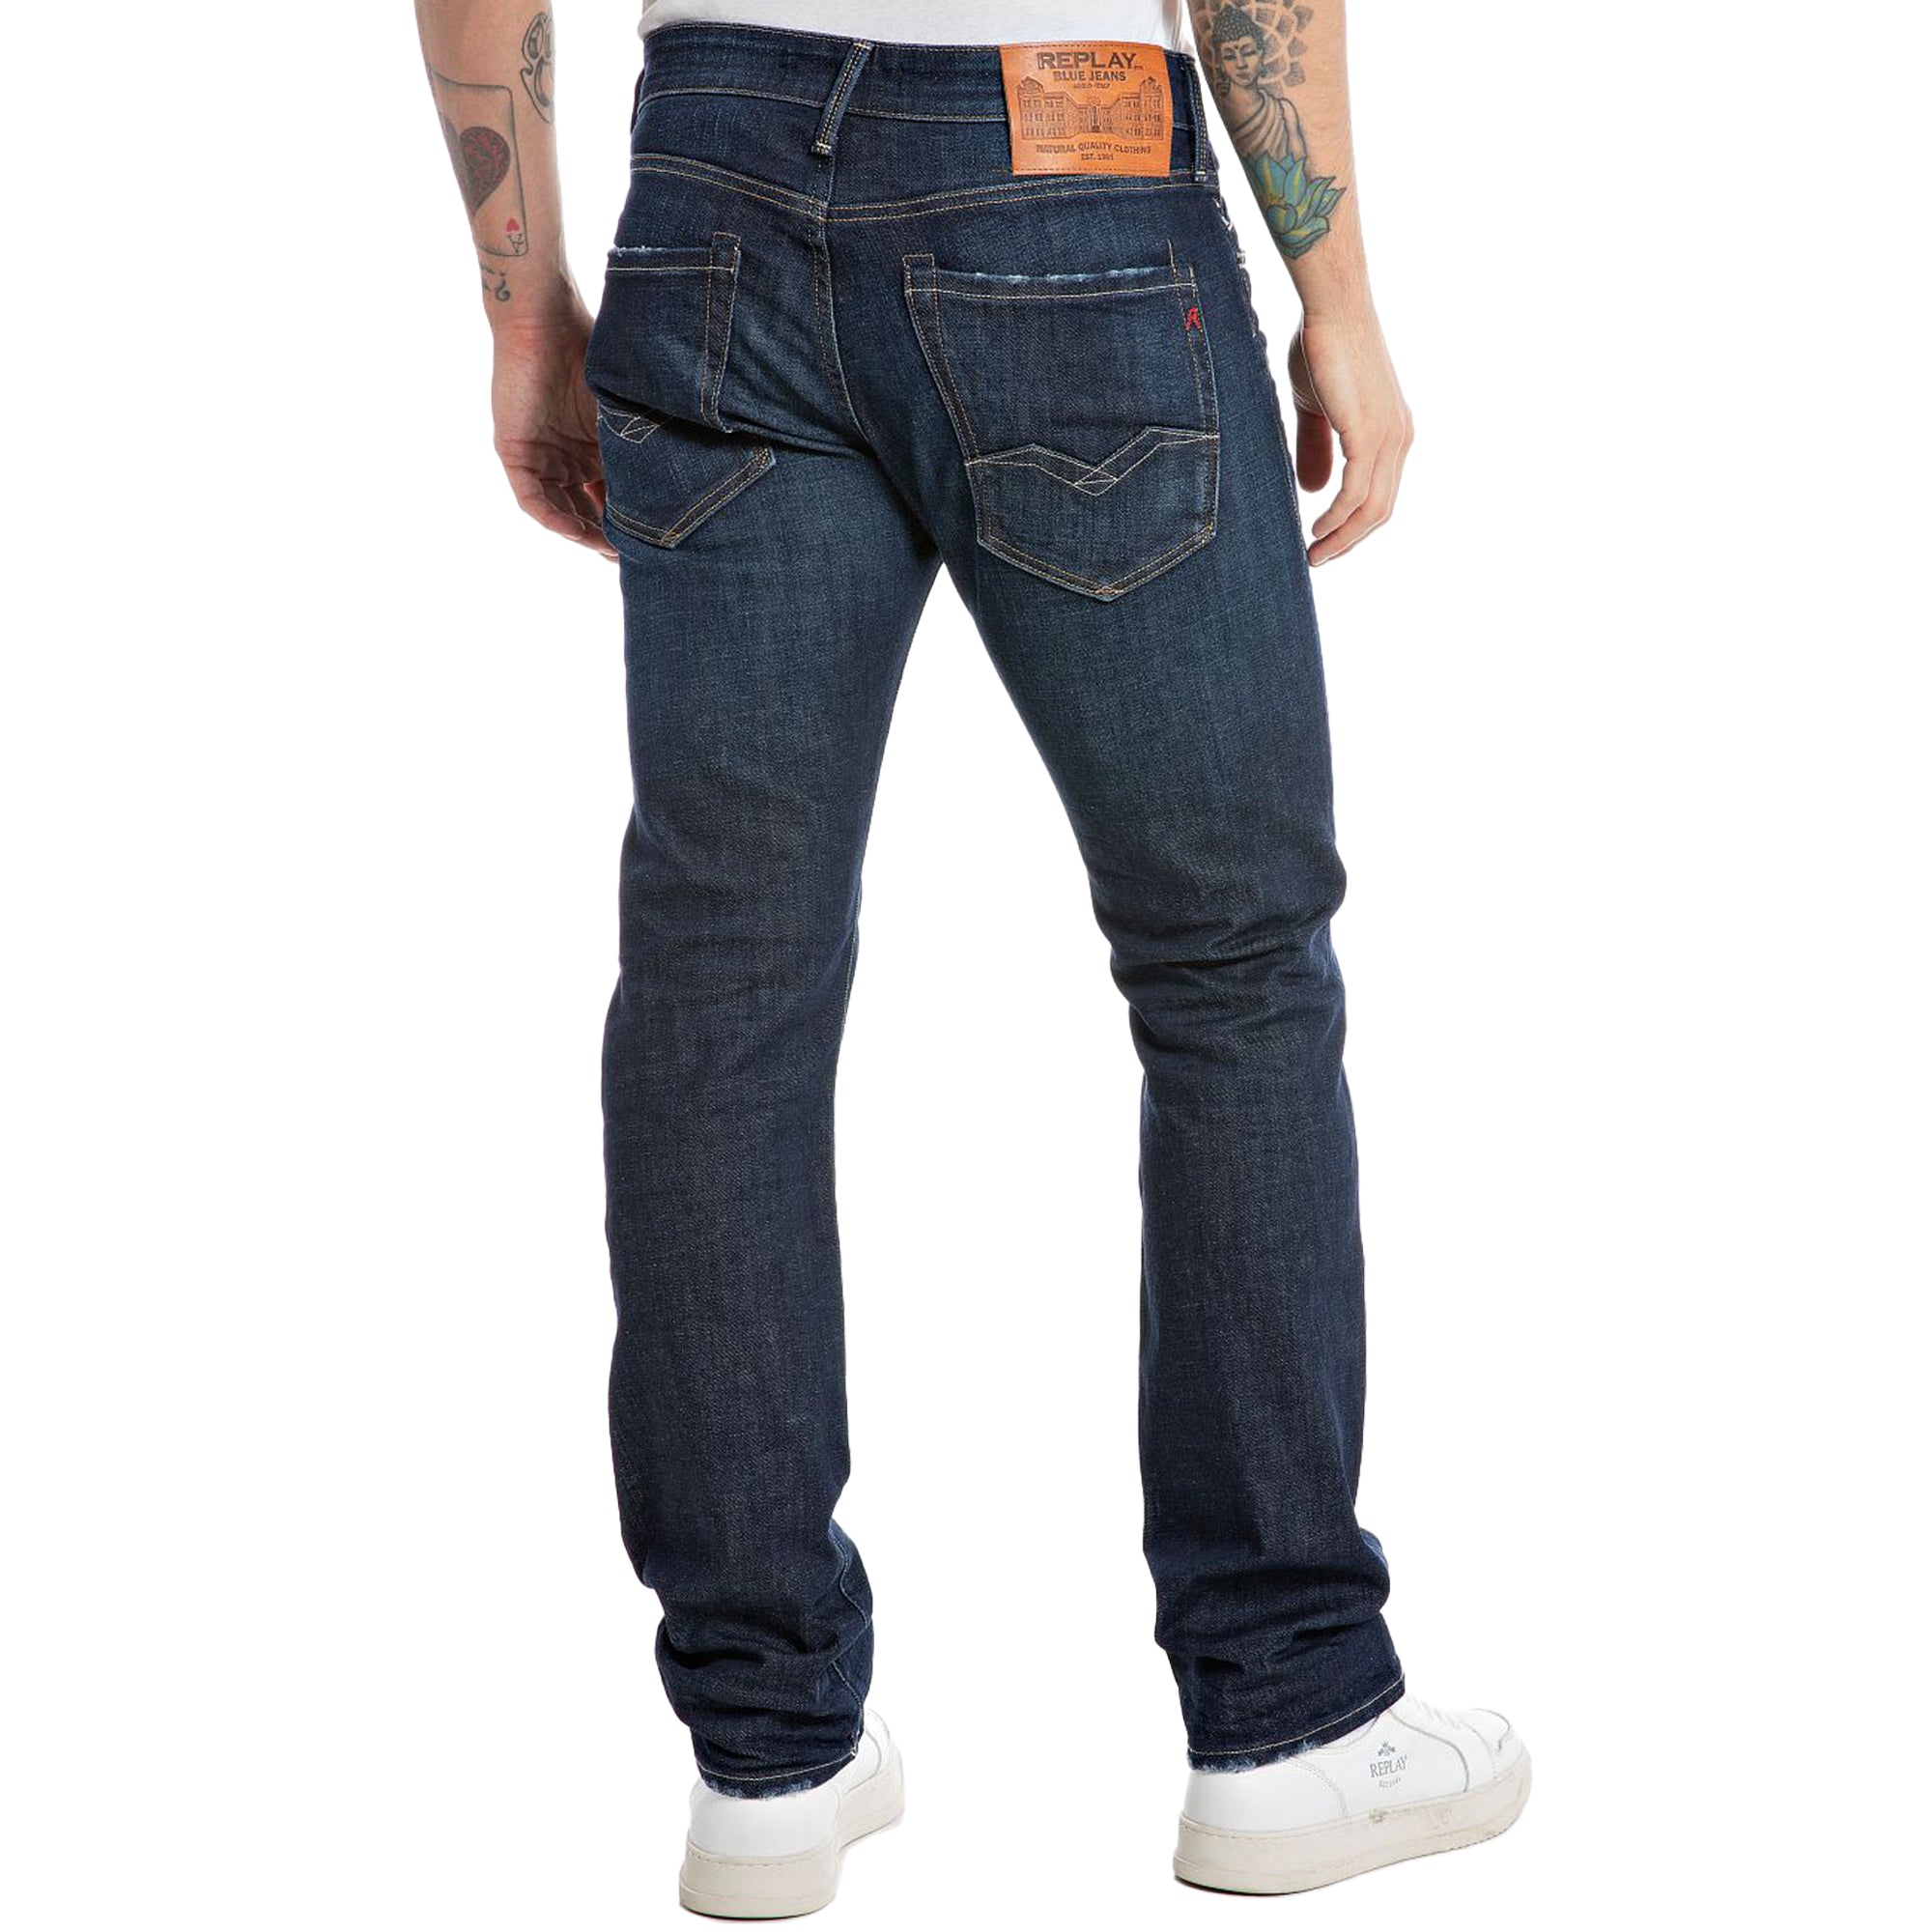 Replay Waitom Regular Fit Jeans - Washed Dark Blue